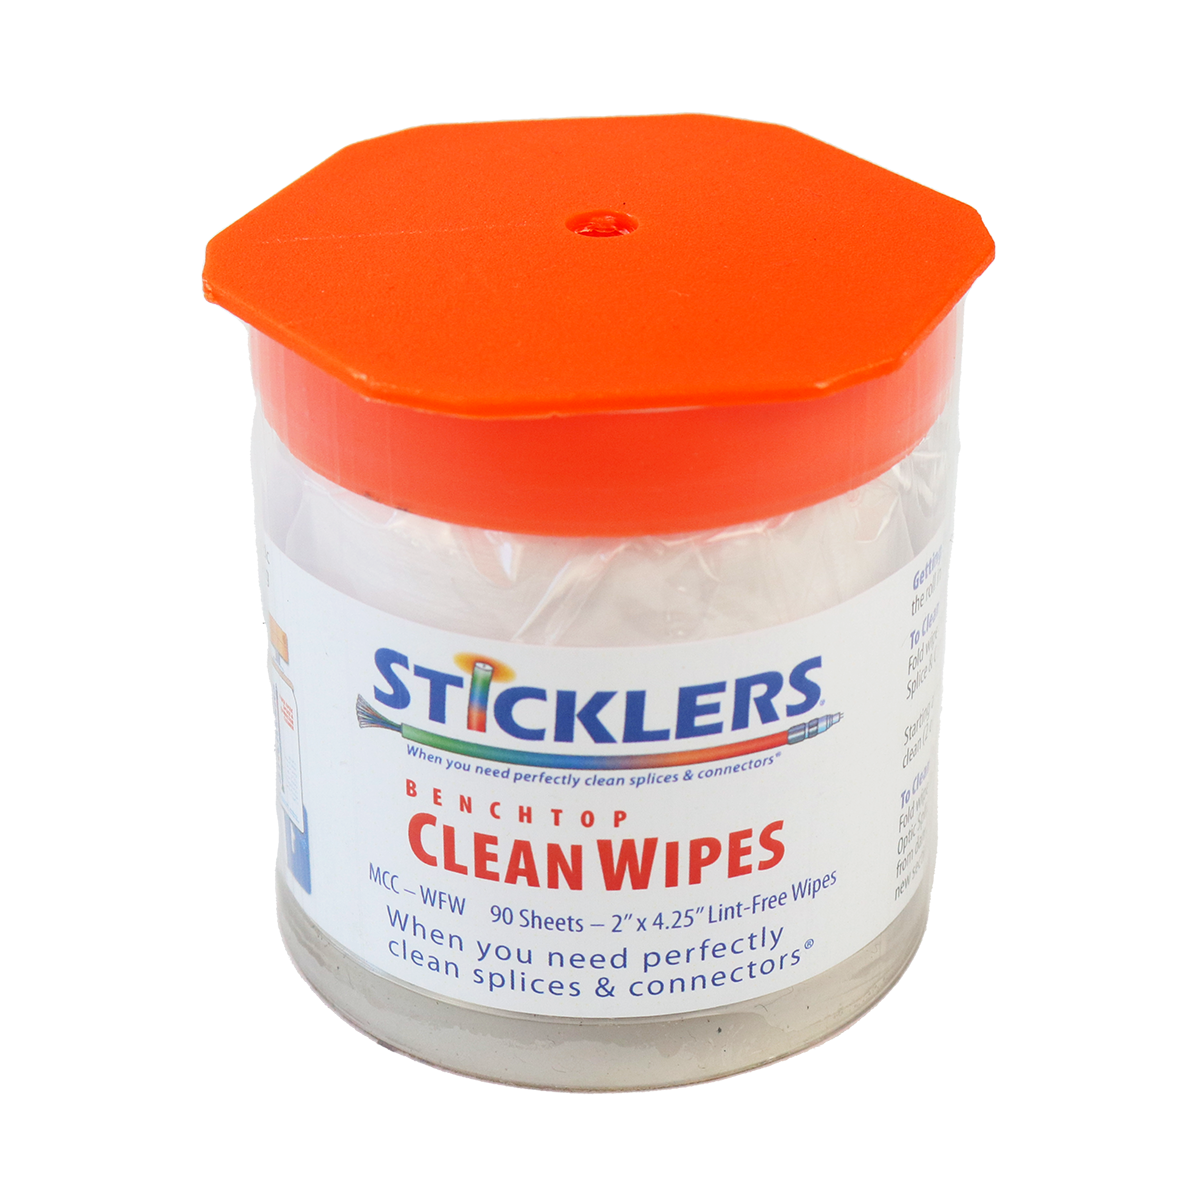 STICKLERS— 90 Wipes in Plastic Tube